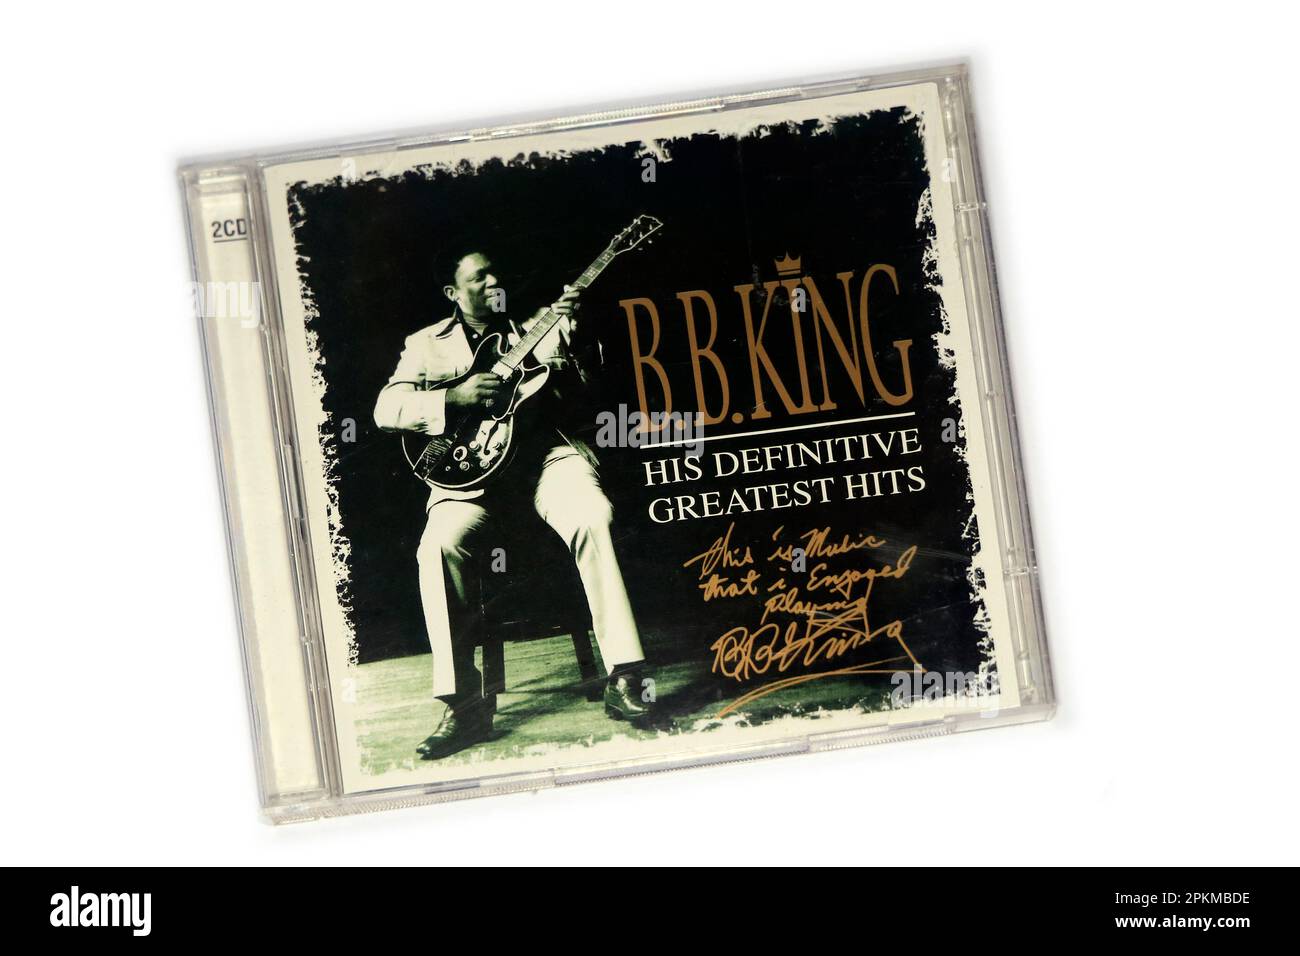 BB King Music CD. His Definitive Greatest Hits. cym Stock Photo